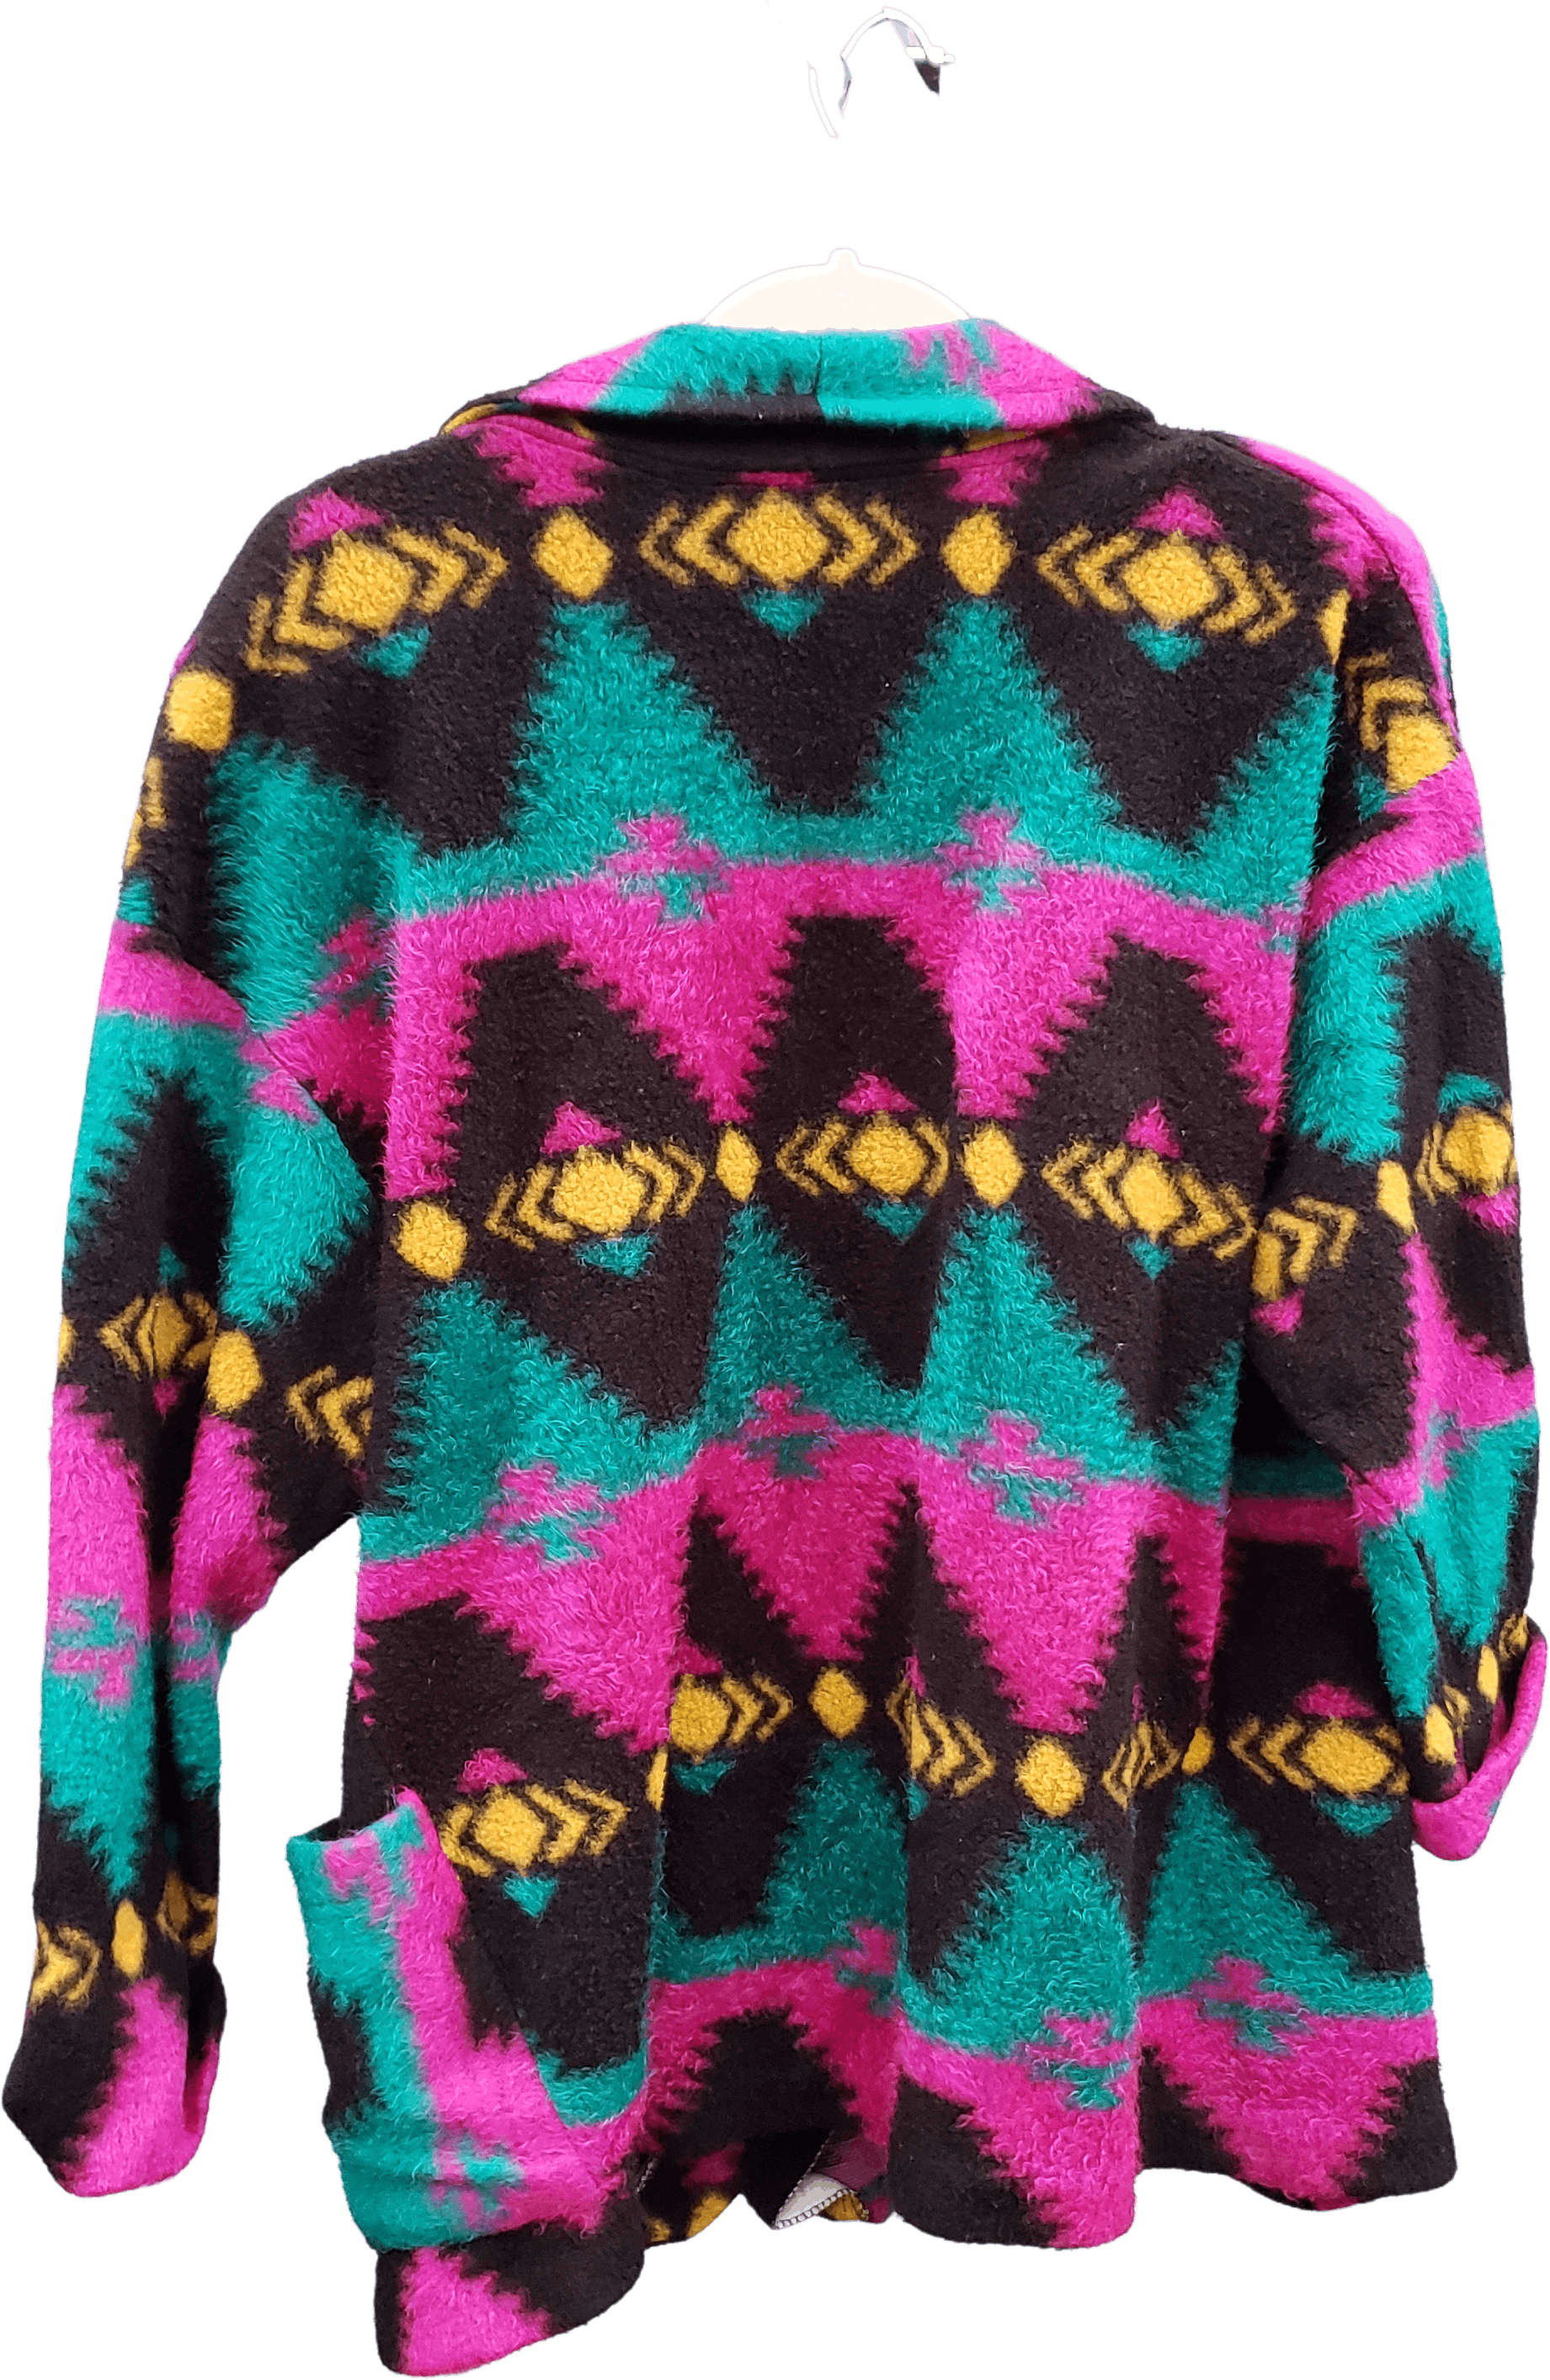 Vintage 80's Fuzzy Neon Geometric One Button Blanket Print Jacket by ...